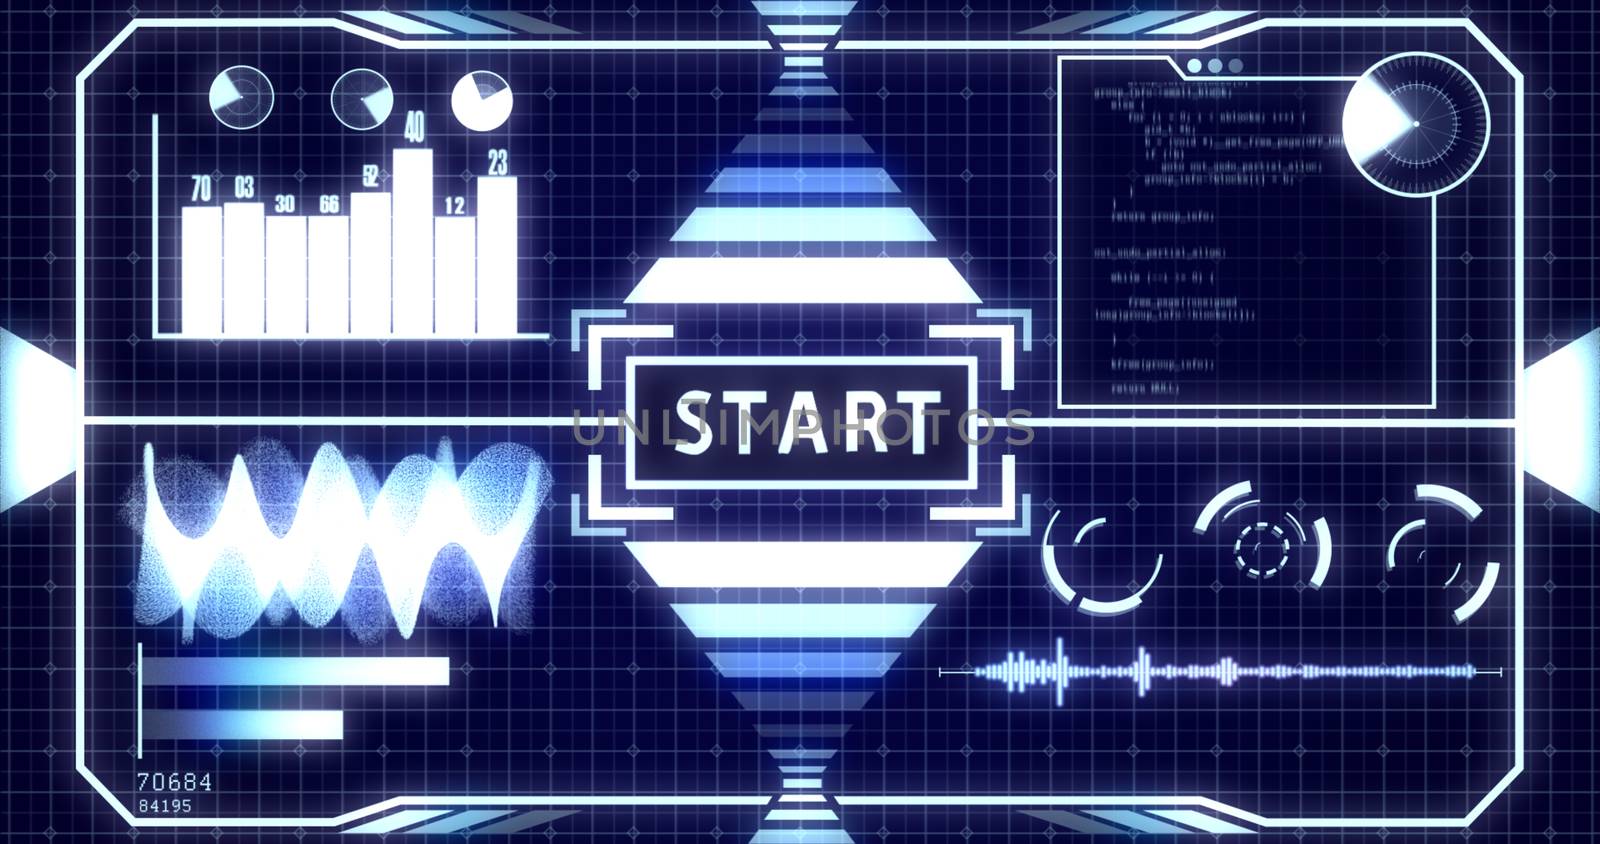 Start Screen on Grid background with Digital objects including Soundwave, Graph, Chart, Circles, Radar, Hacker typing and Glowing light bars Ver.1 (Full screen) by ariya23156